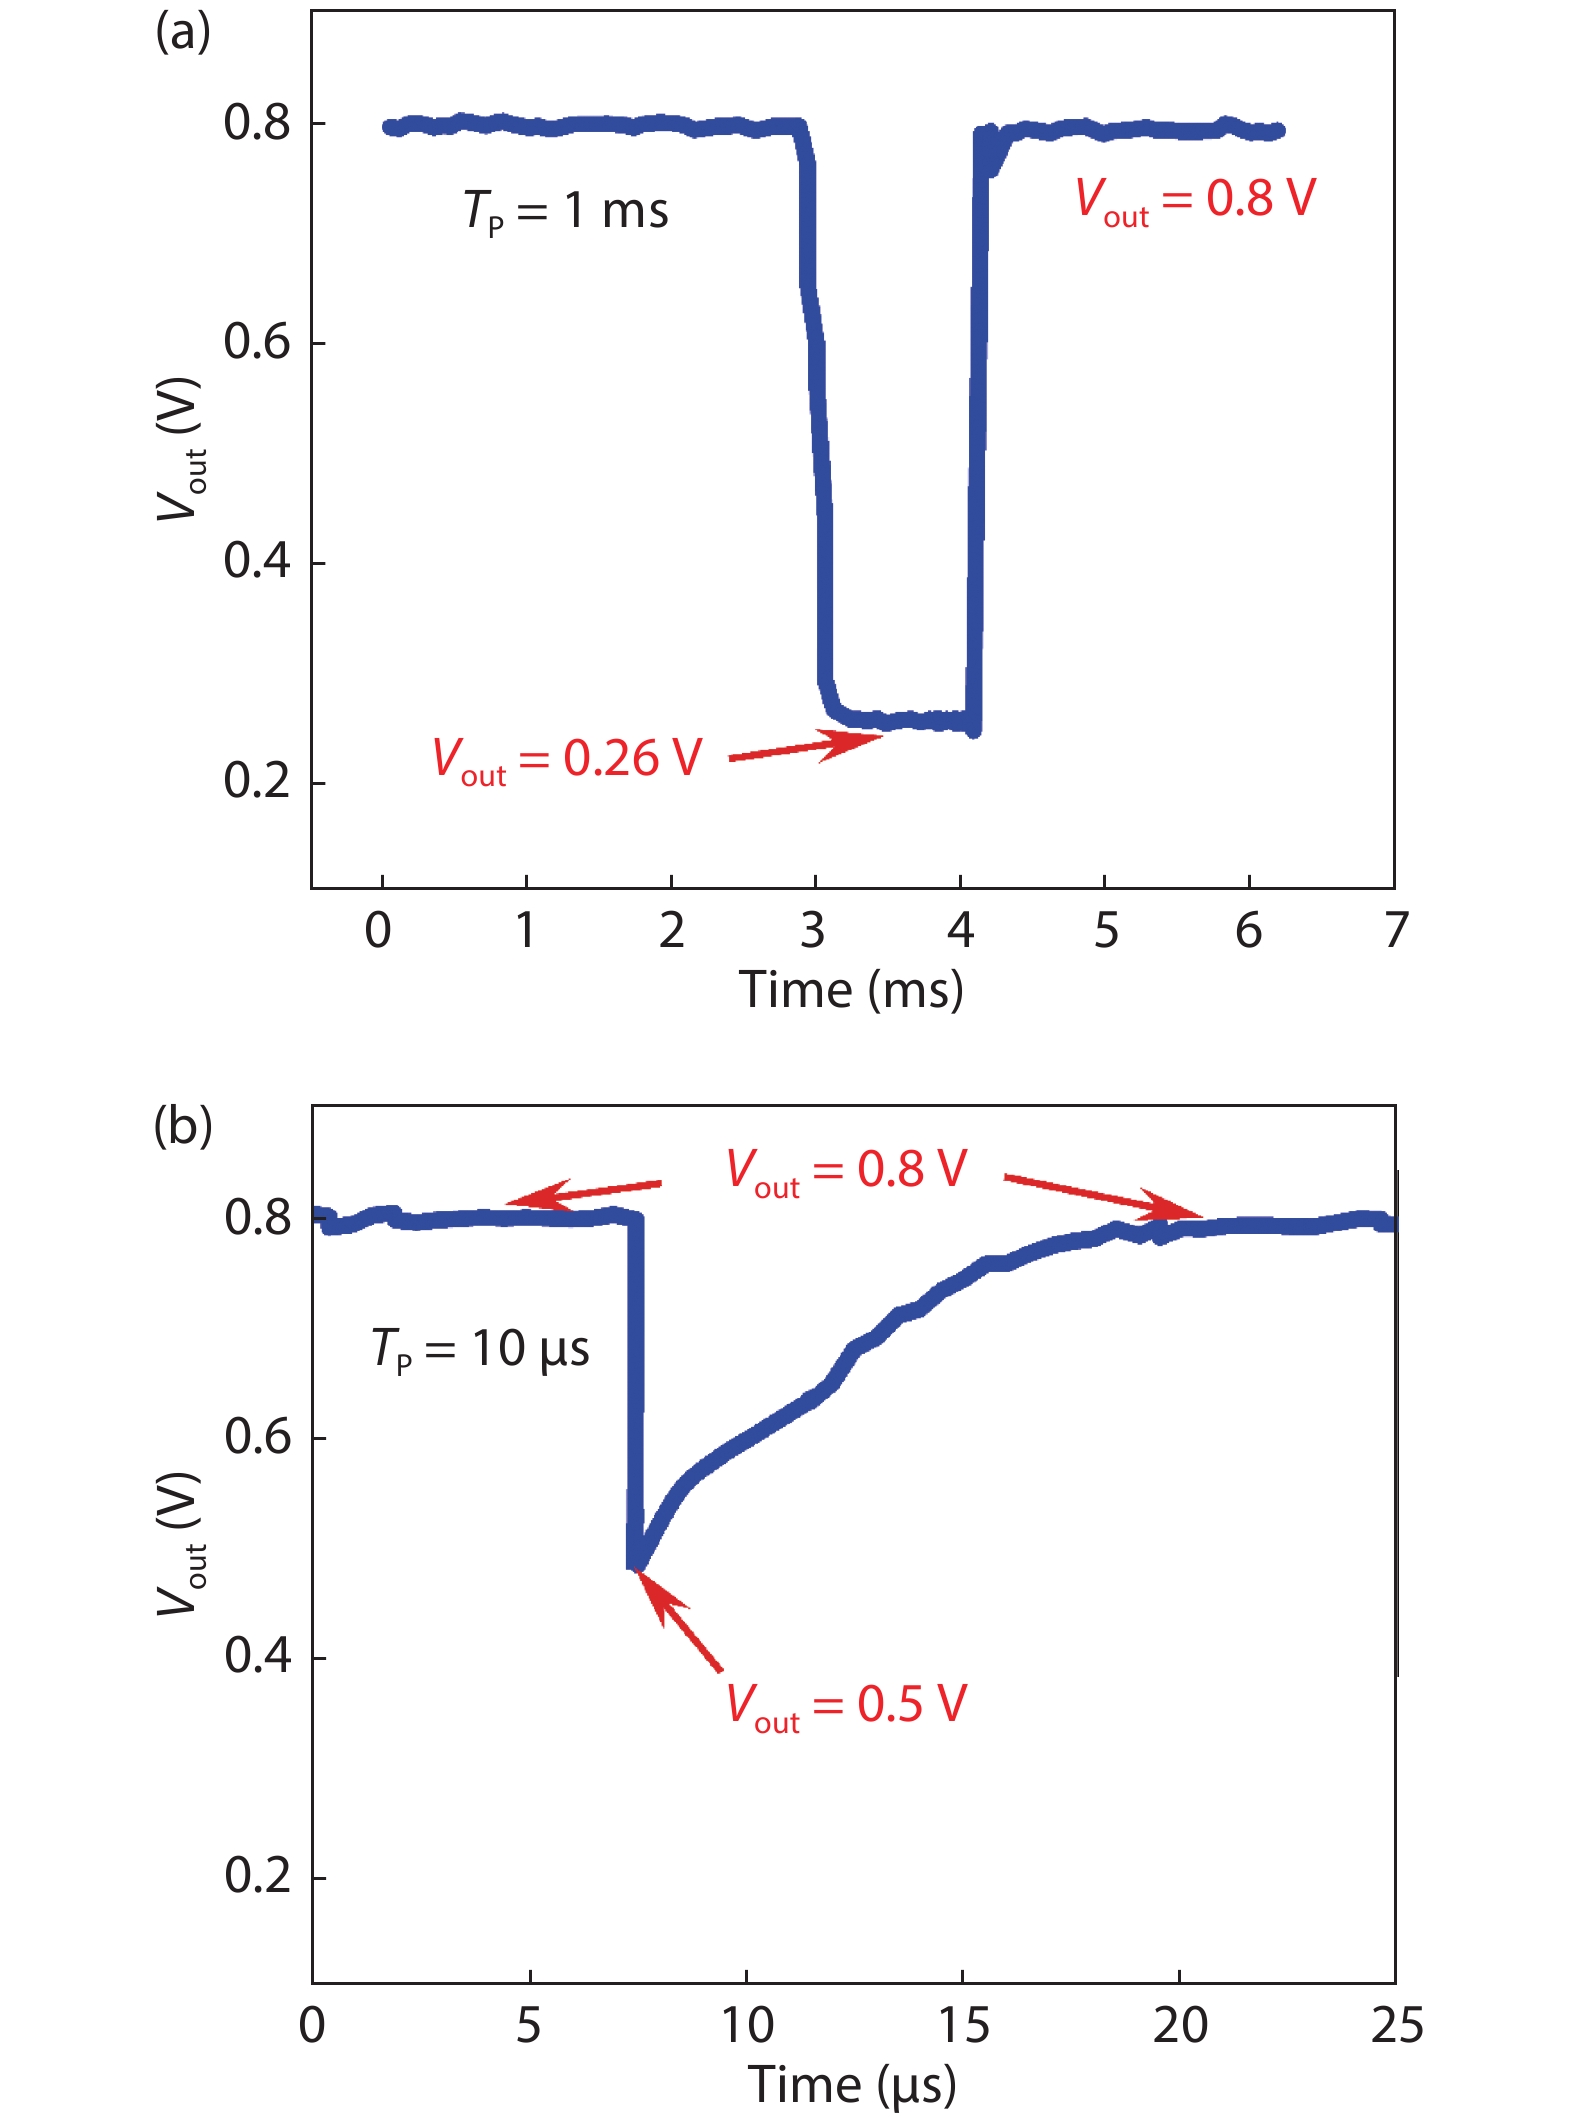 (Color online) Real-time output data of the load-resistance based inverter measurement, with the gate pulse width (a) 1 ms, and (b) 10 μs, respectively.